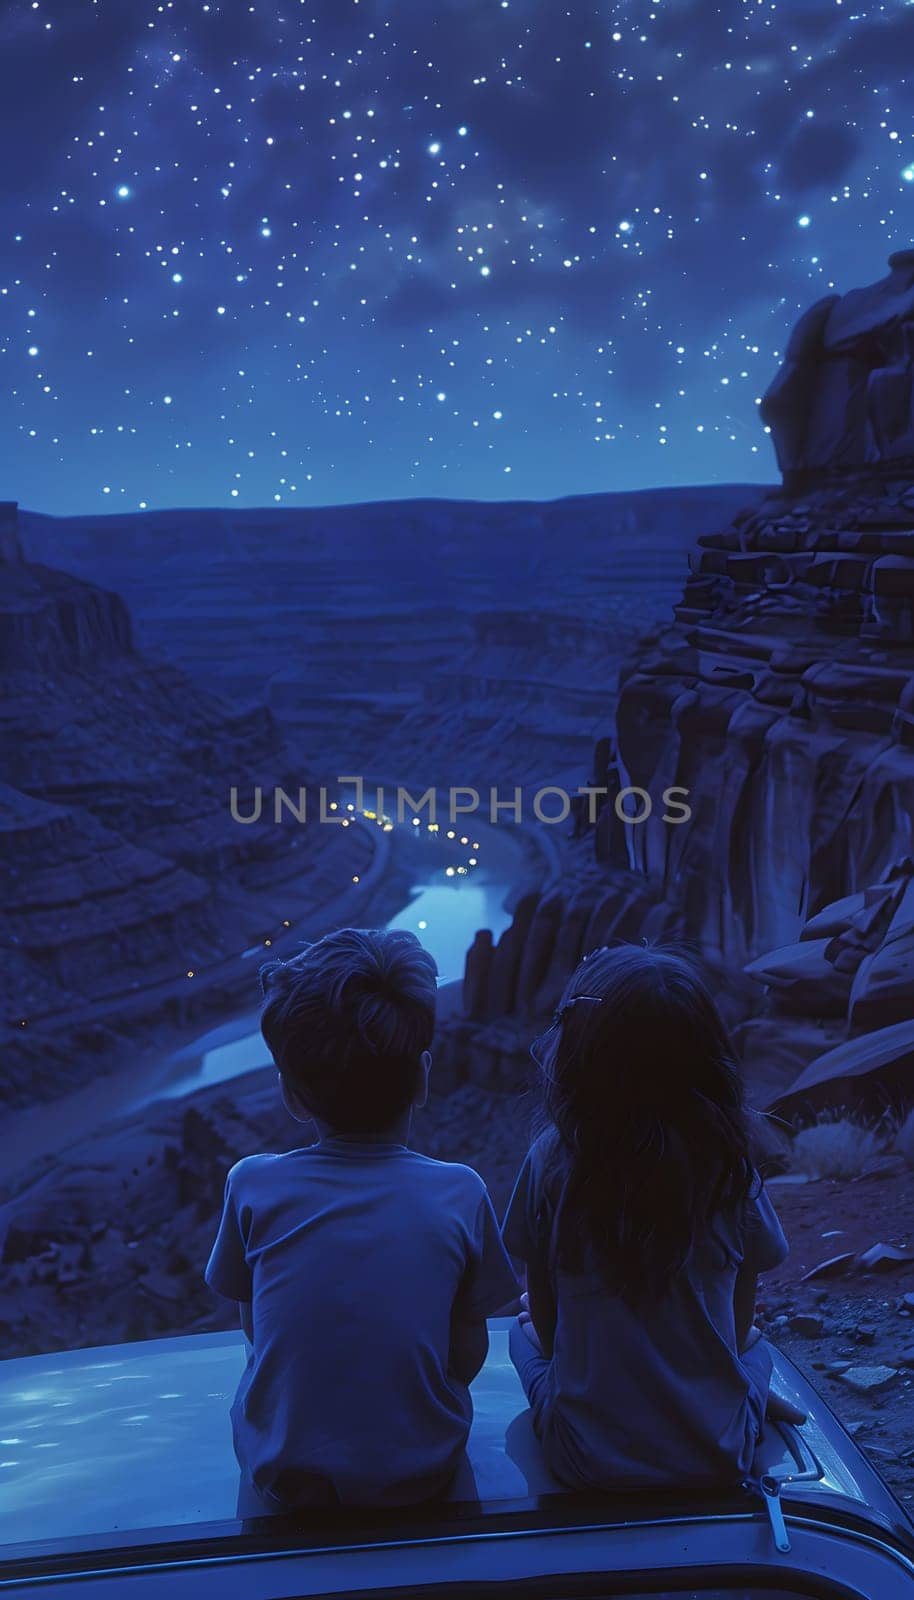 A boy and a girl are perched on the car rooftop gazing at the electric blue sky filled with stars and distant astronomical objects, surrounded by the natural landscape and peaceful atmosphere